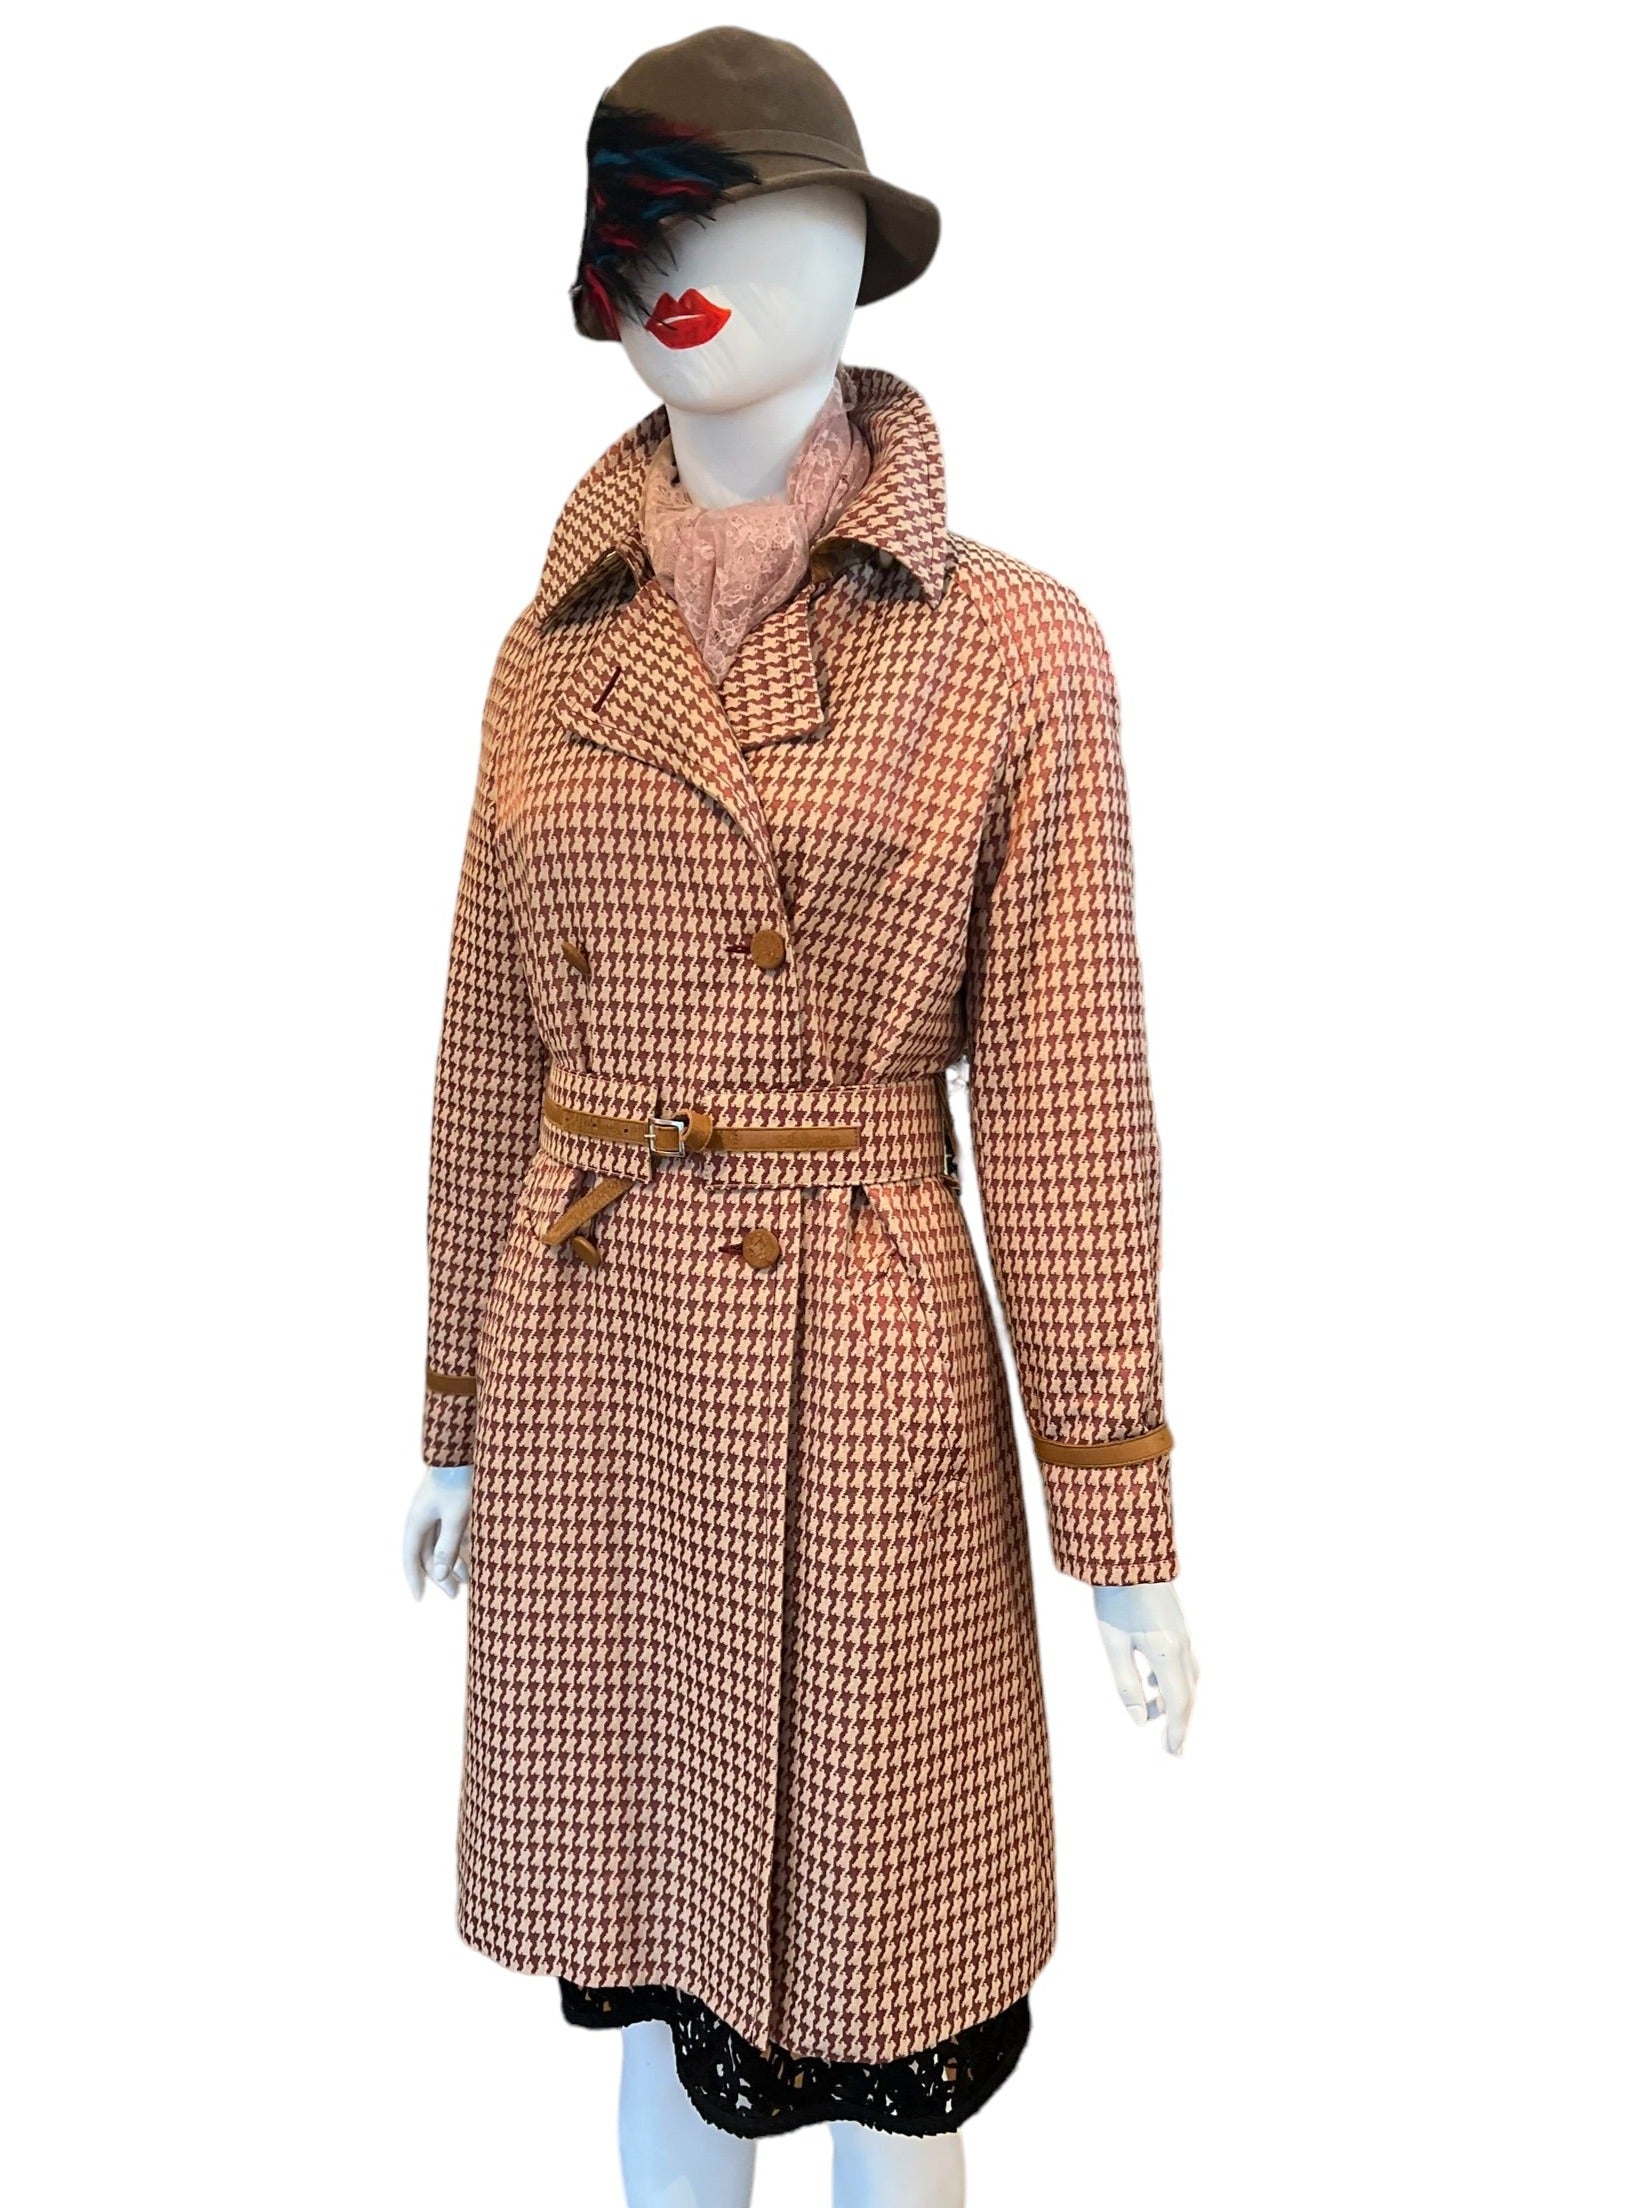 GIANFRANCO FERRÉ VINTAGE PECOAT - vintage houndstooth, leather accents, burnt orange red, golden yellow, tie around belt, double breasted